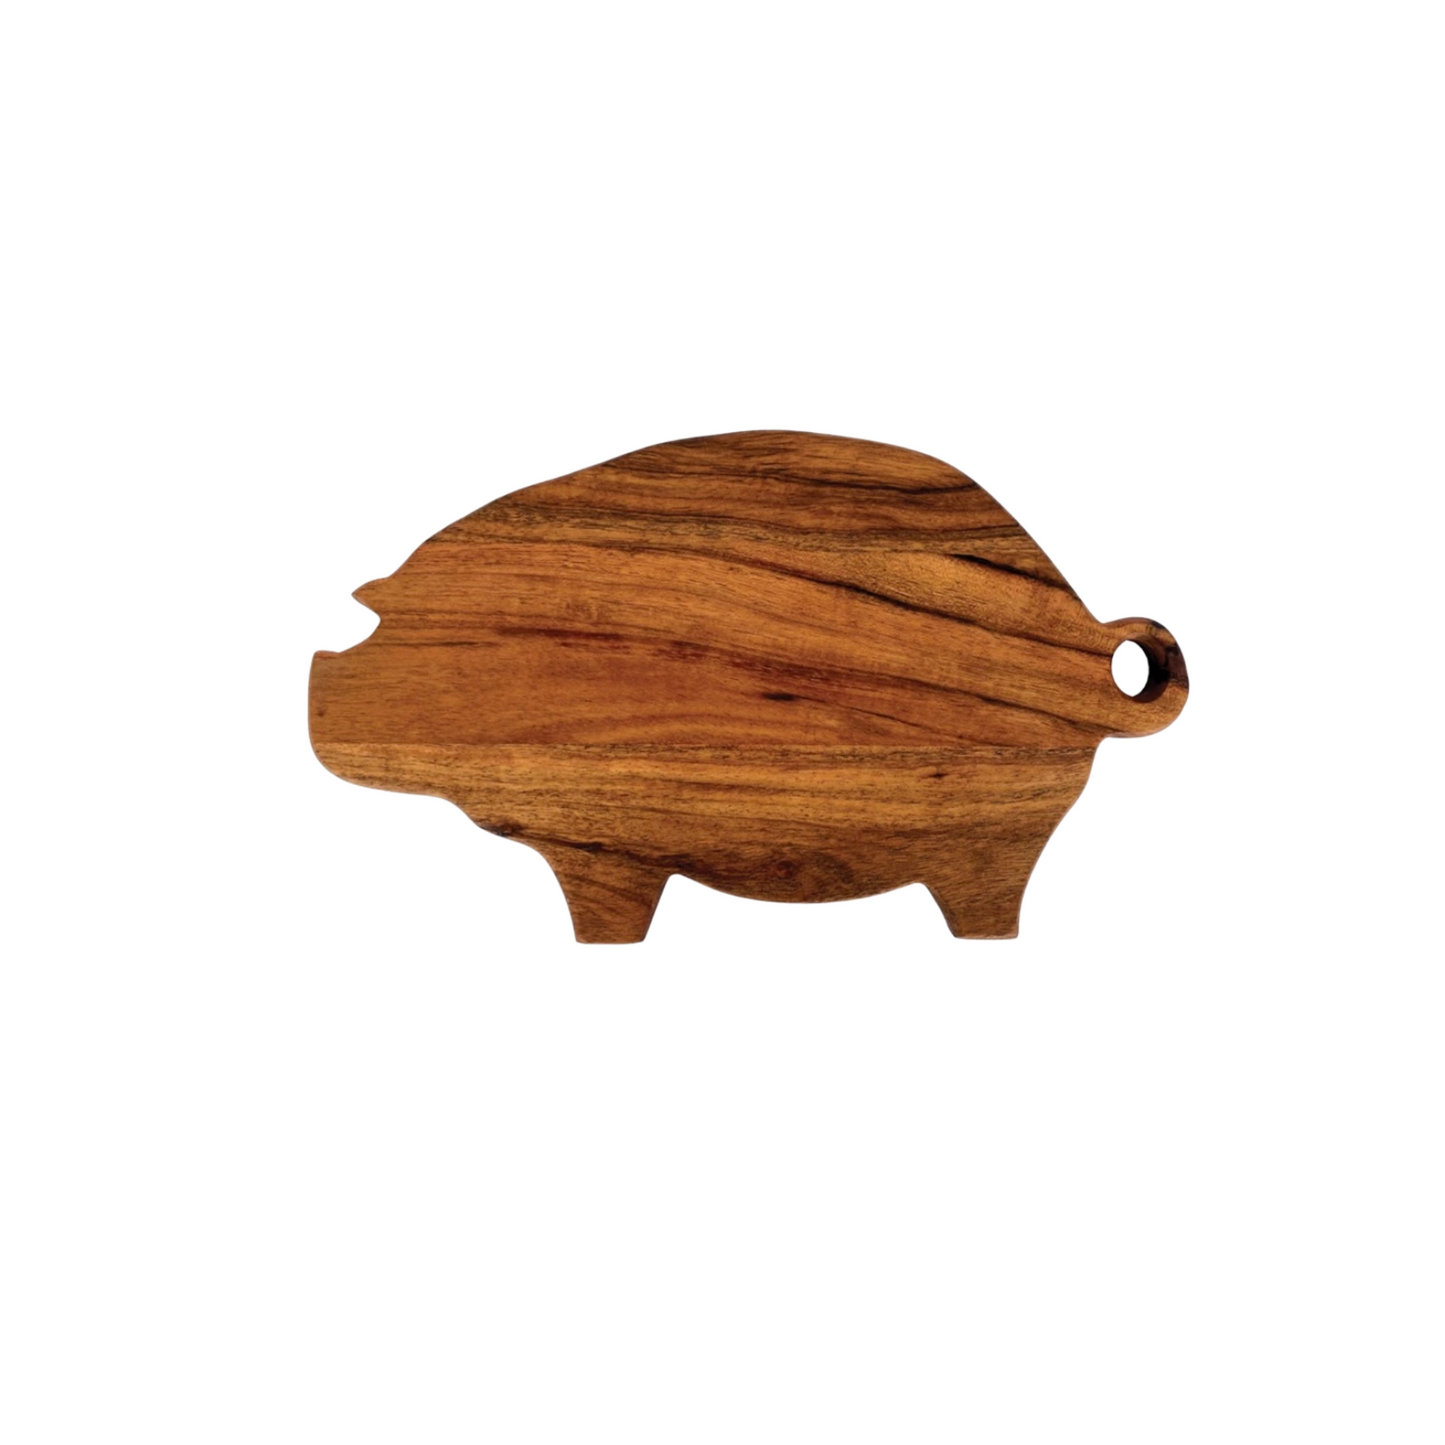 Mango Wood Pig Shaped Cheese/Cutting Board with Handle